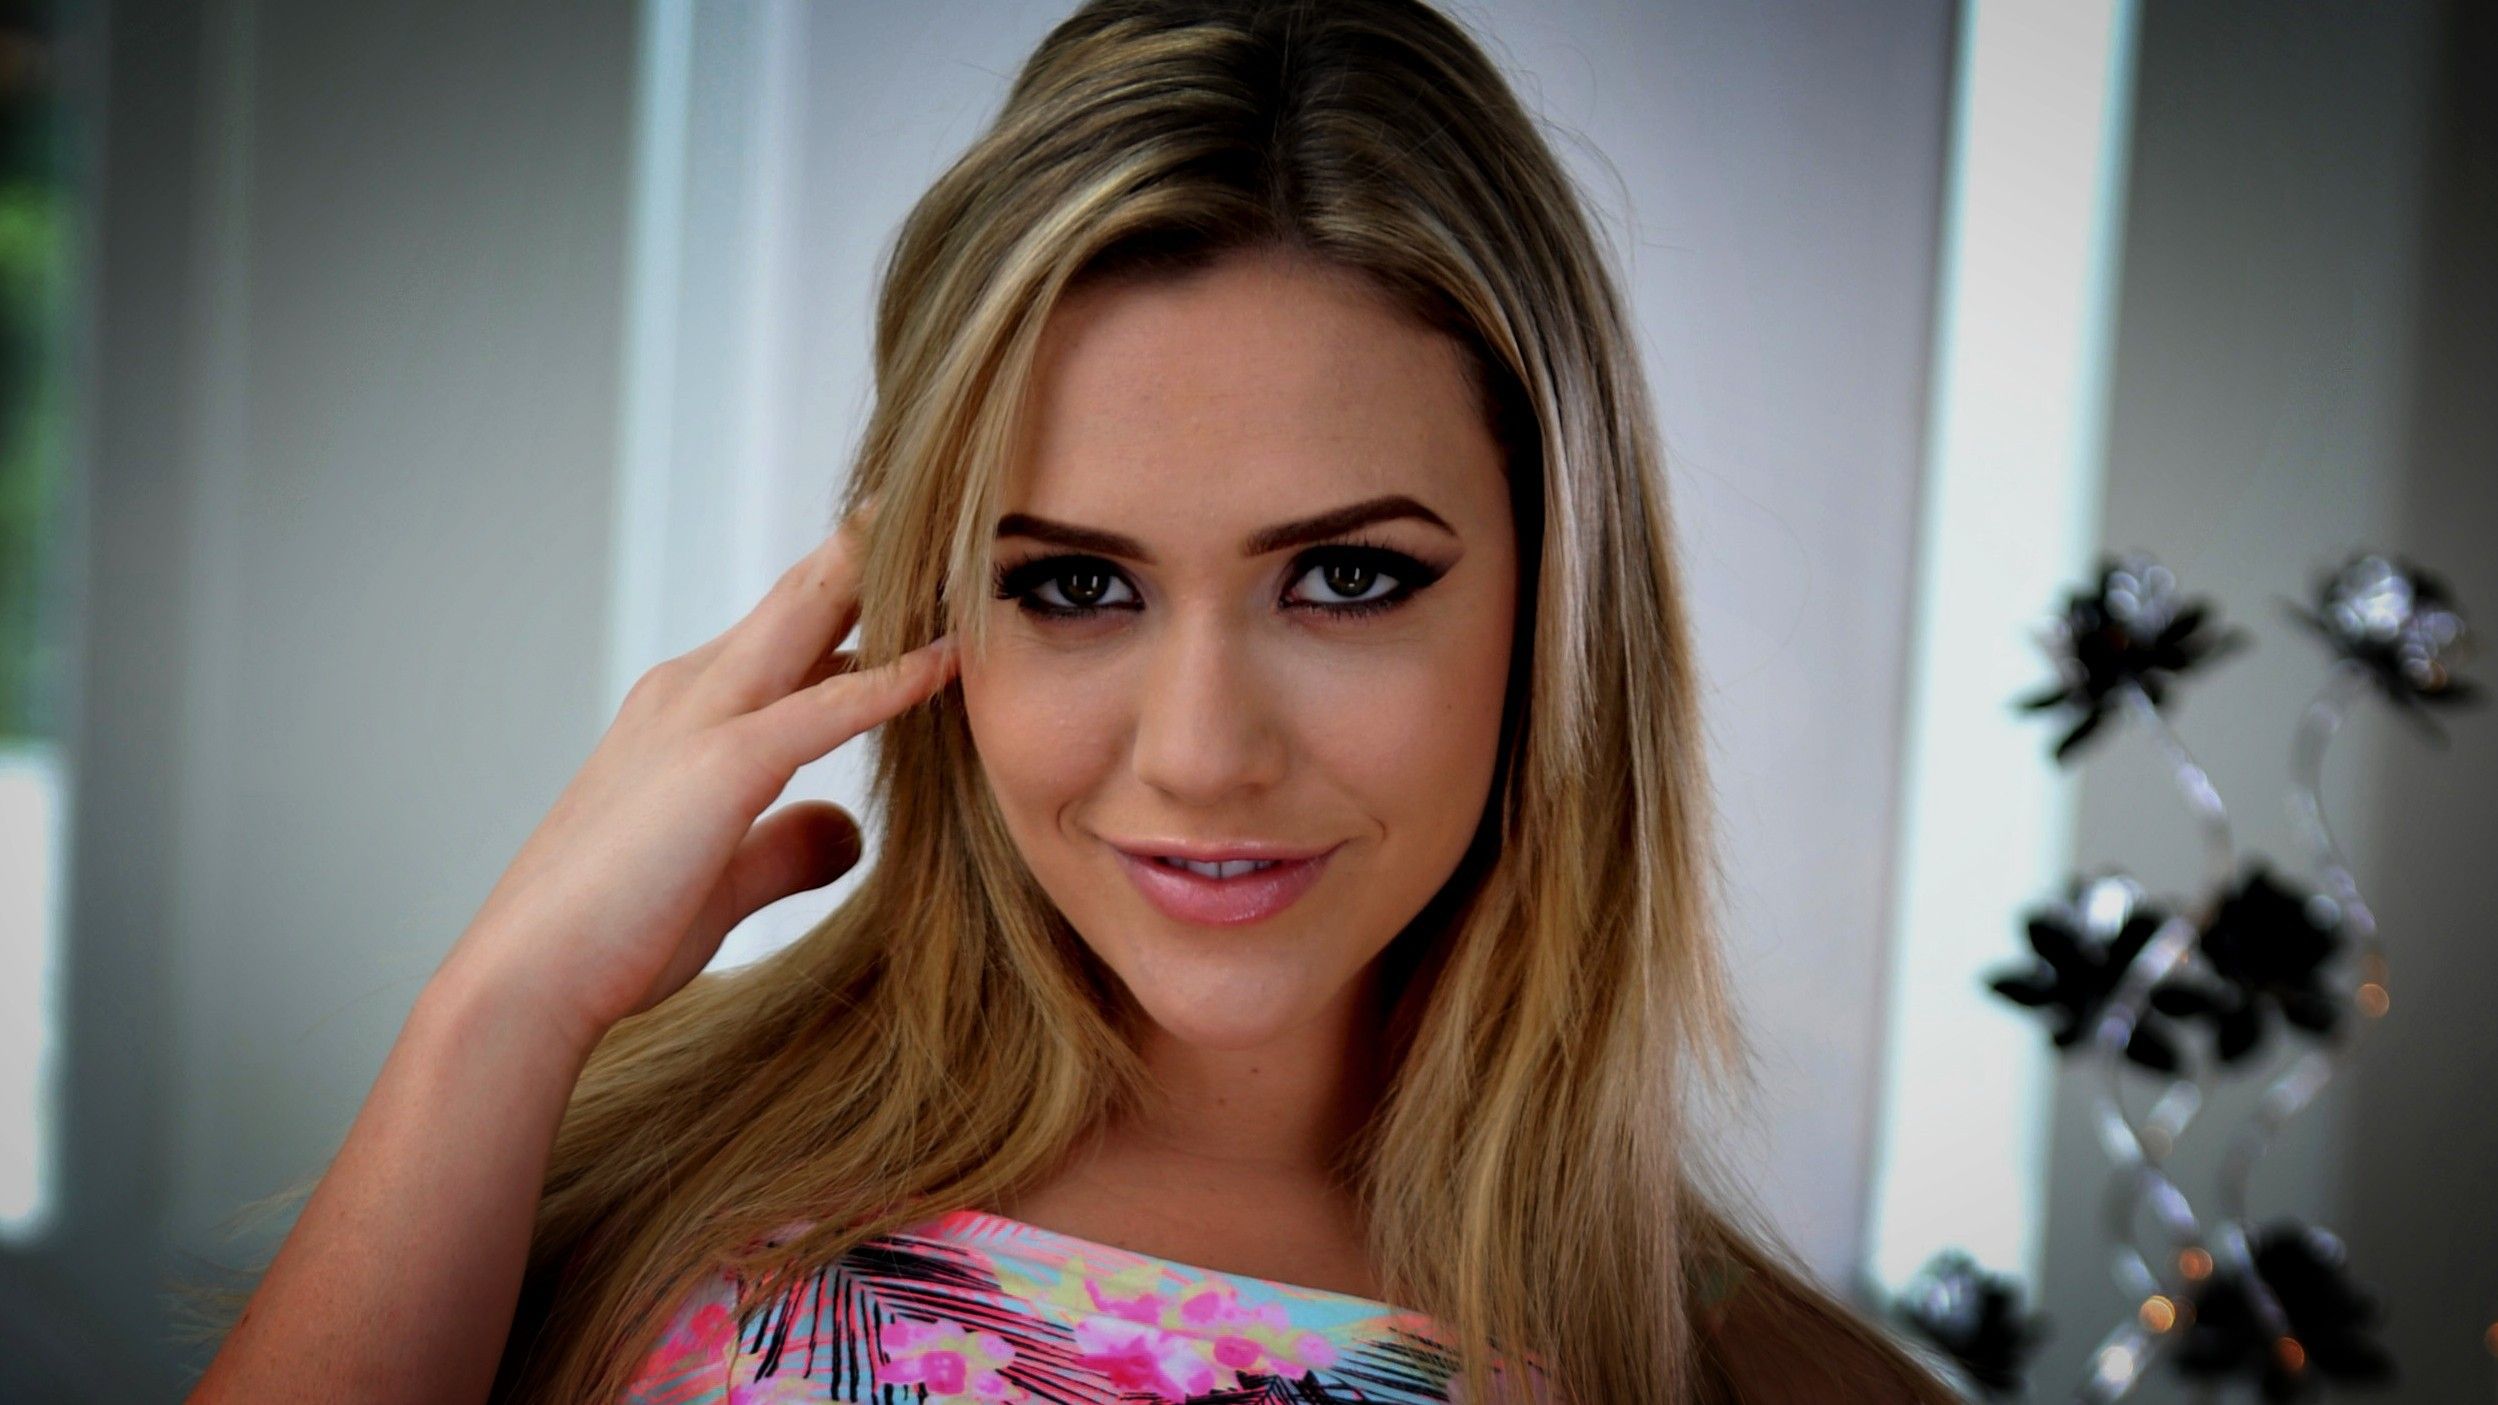 Mia Malkova Wallpapers Image Photos Pictures Backgrounds.